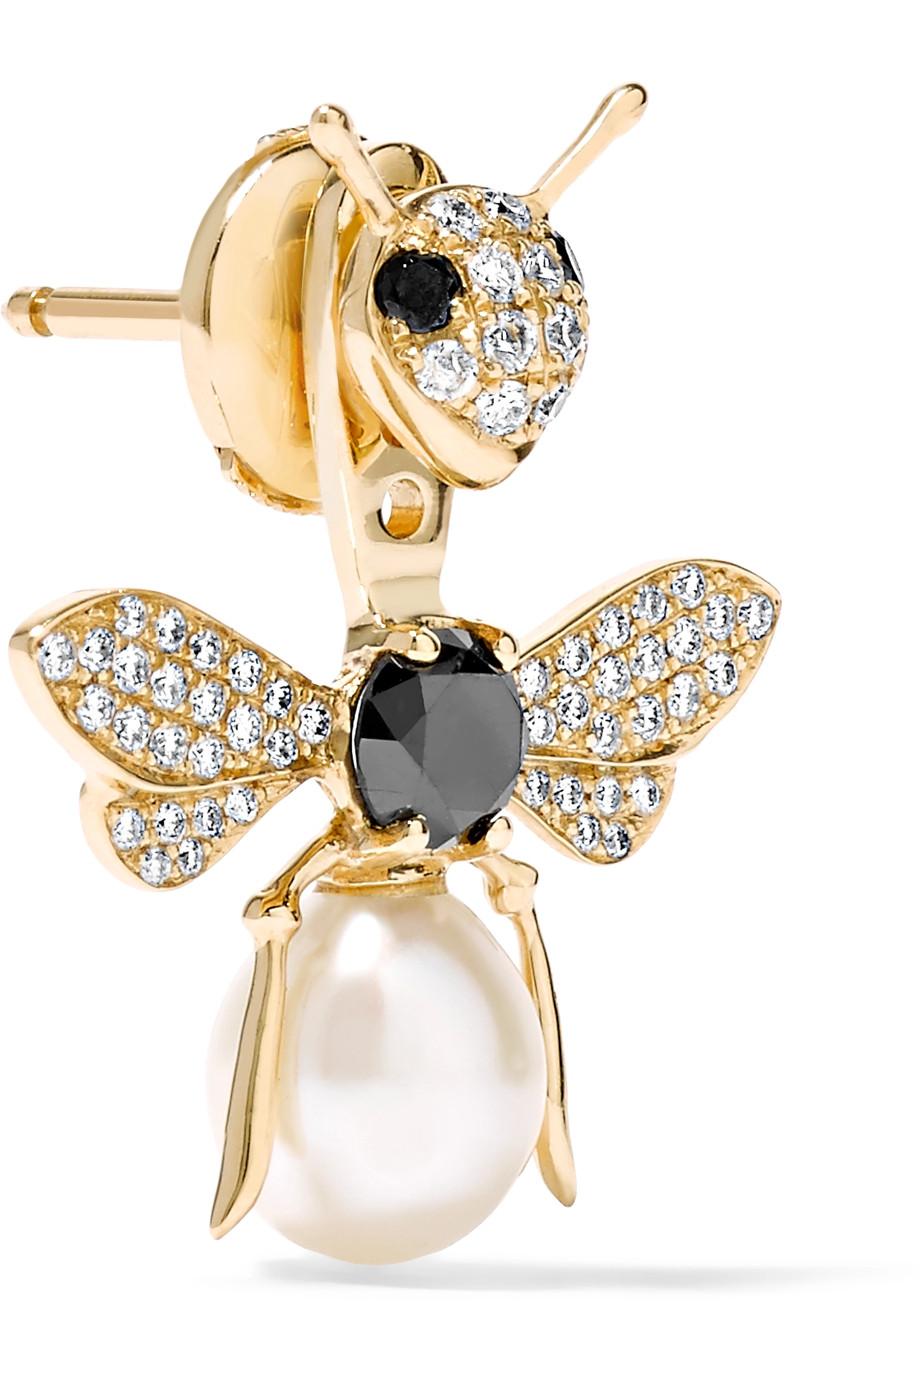 Stud and Ear Jacket in 18 Karats Yellow Gold Stud: 18K White Gold 1,4 gr Diamonds 0,07ct Black Diamonds 0,05t (Bee Head) Ear Jacket: 18K White Gold 2gr Diamonds 0,15ct Black Diamond 0,30ct Pearl 3ct (Bee Body) Alpa System Sold as a Pack by unit